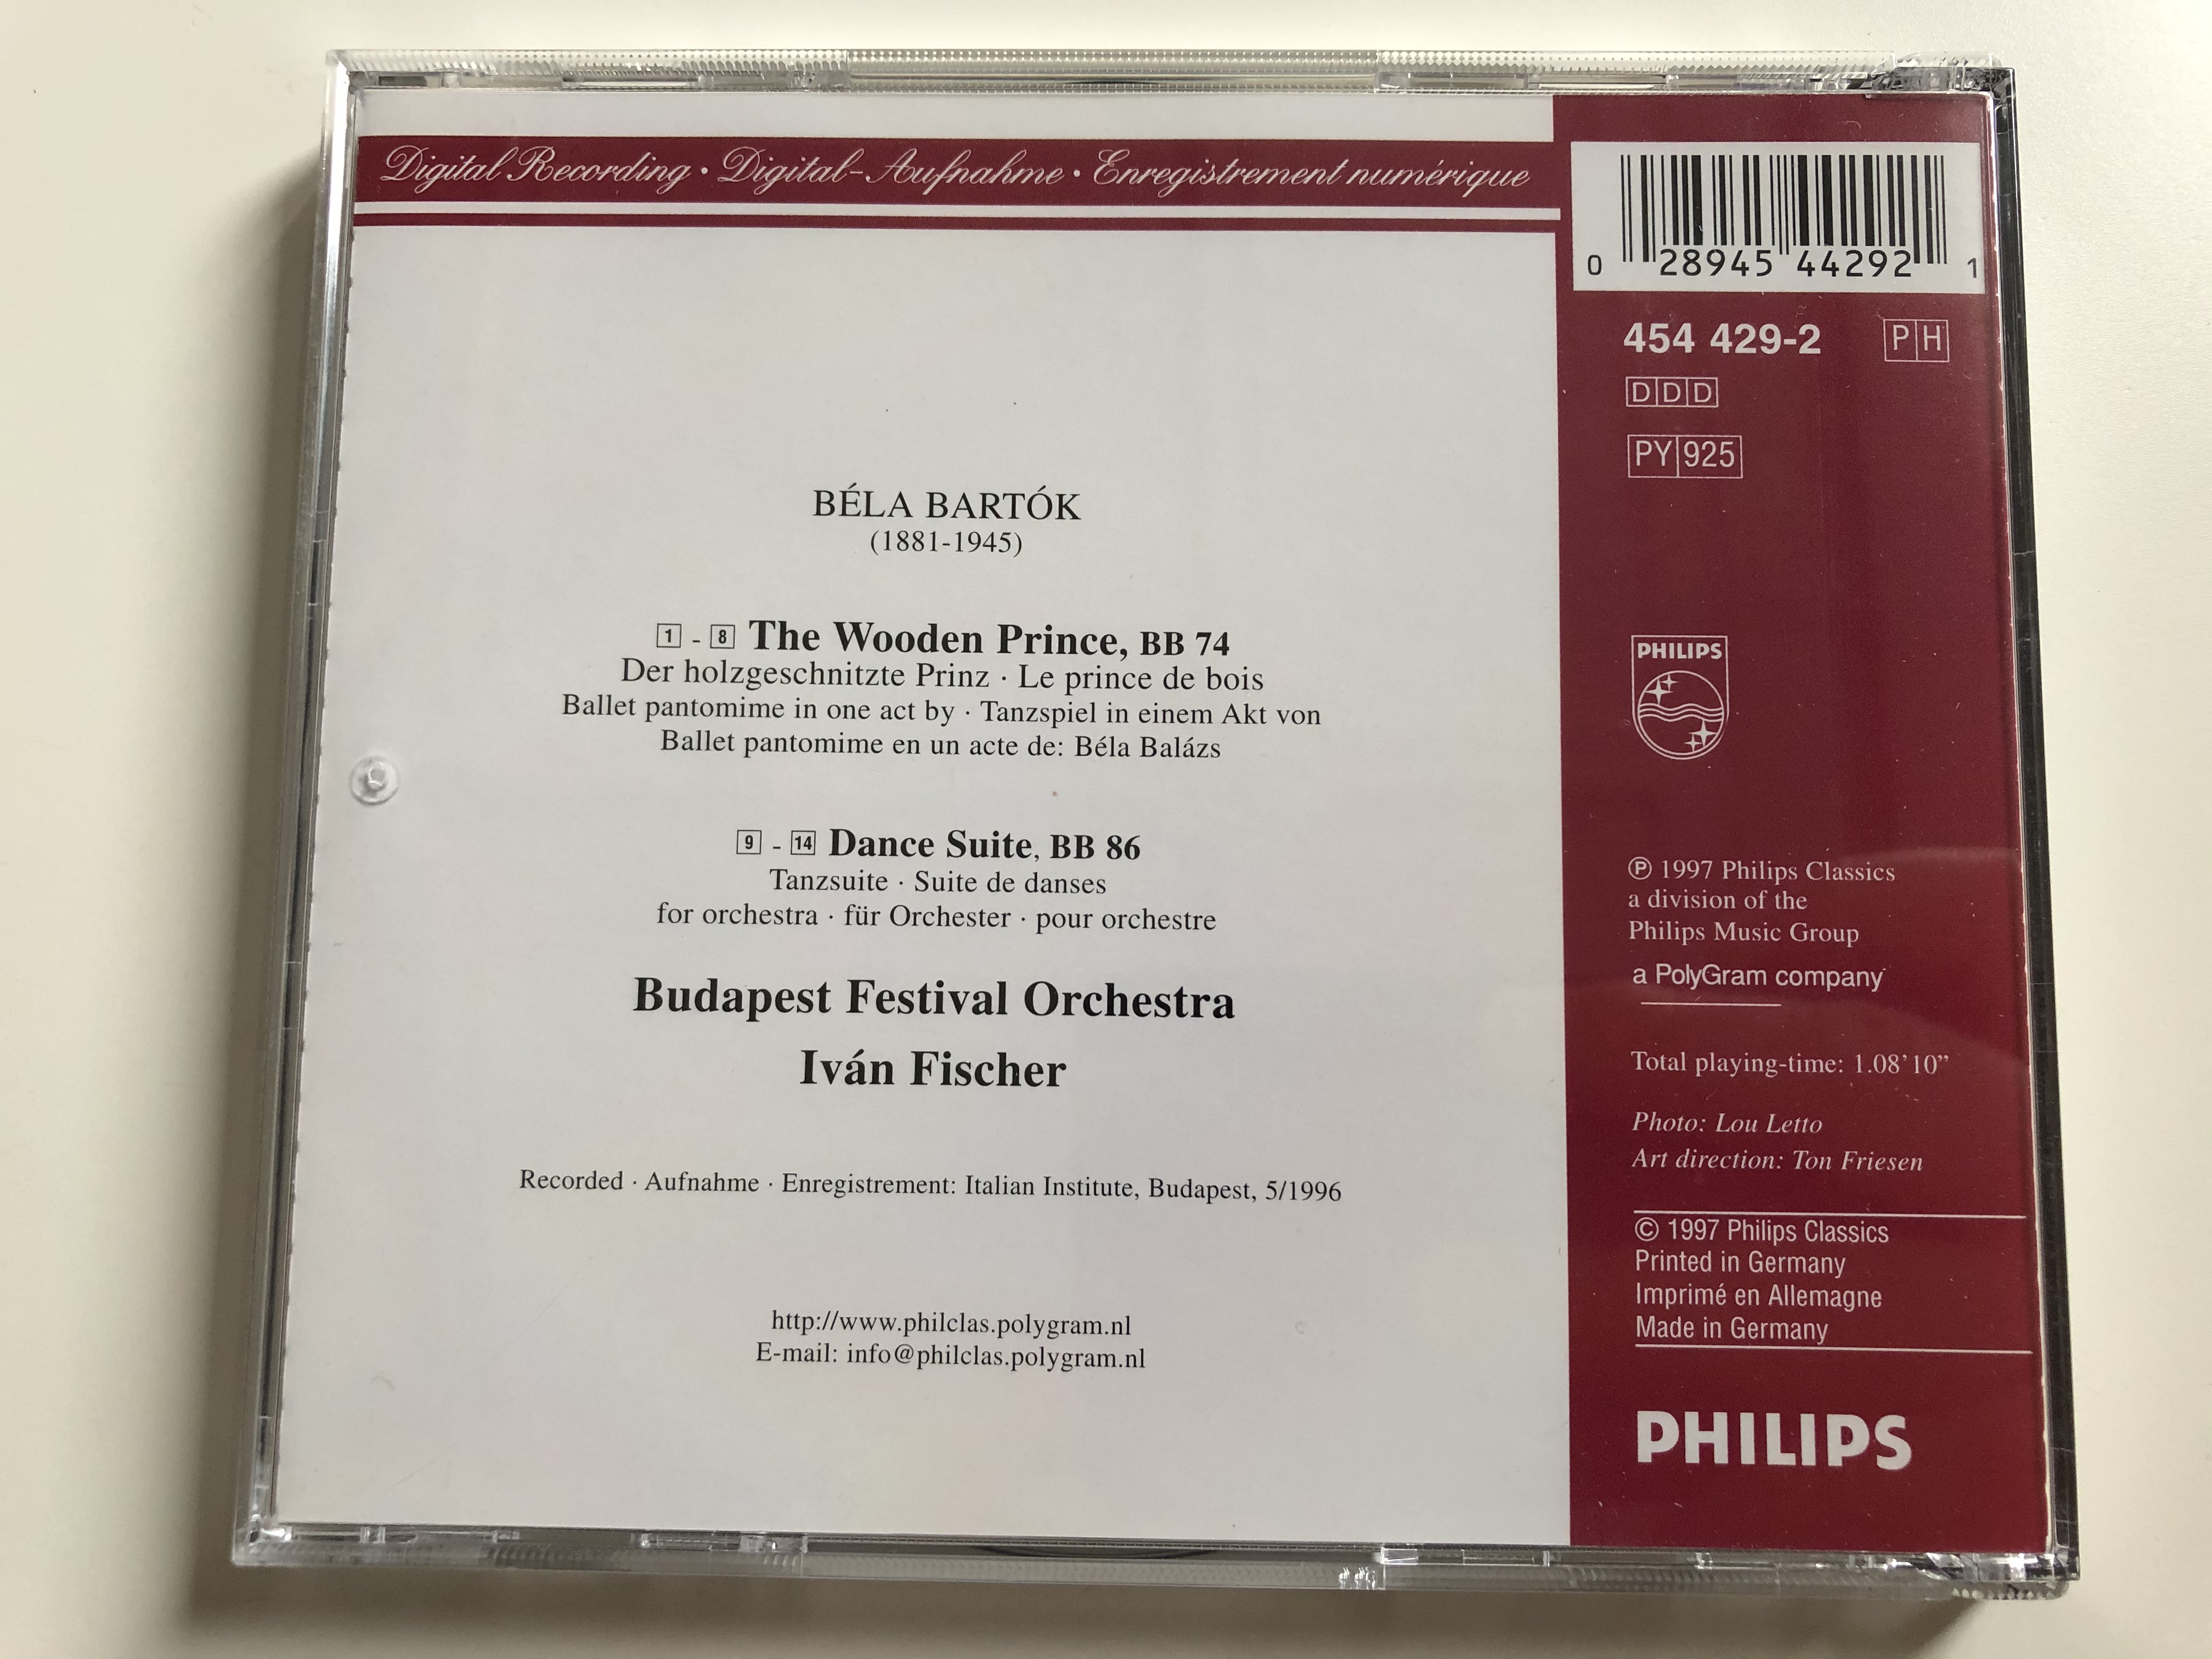 bela-bartok-the-wooden-prince-dance-suite-budapest-festival-orchestra-ivan-fischer-the-orchestral-works-philips-audio-cd-1997-454-429-2-8-.jpg